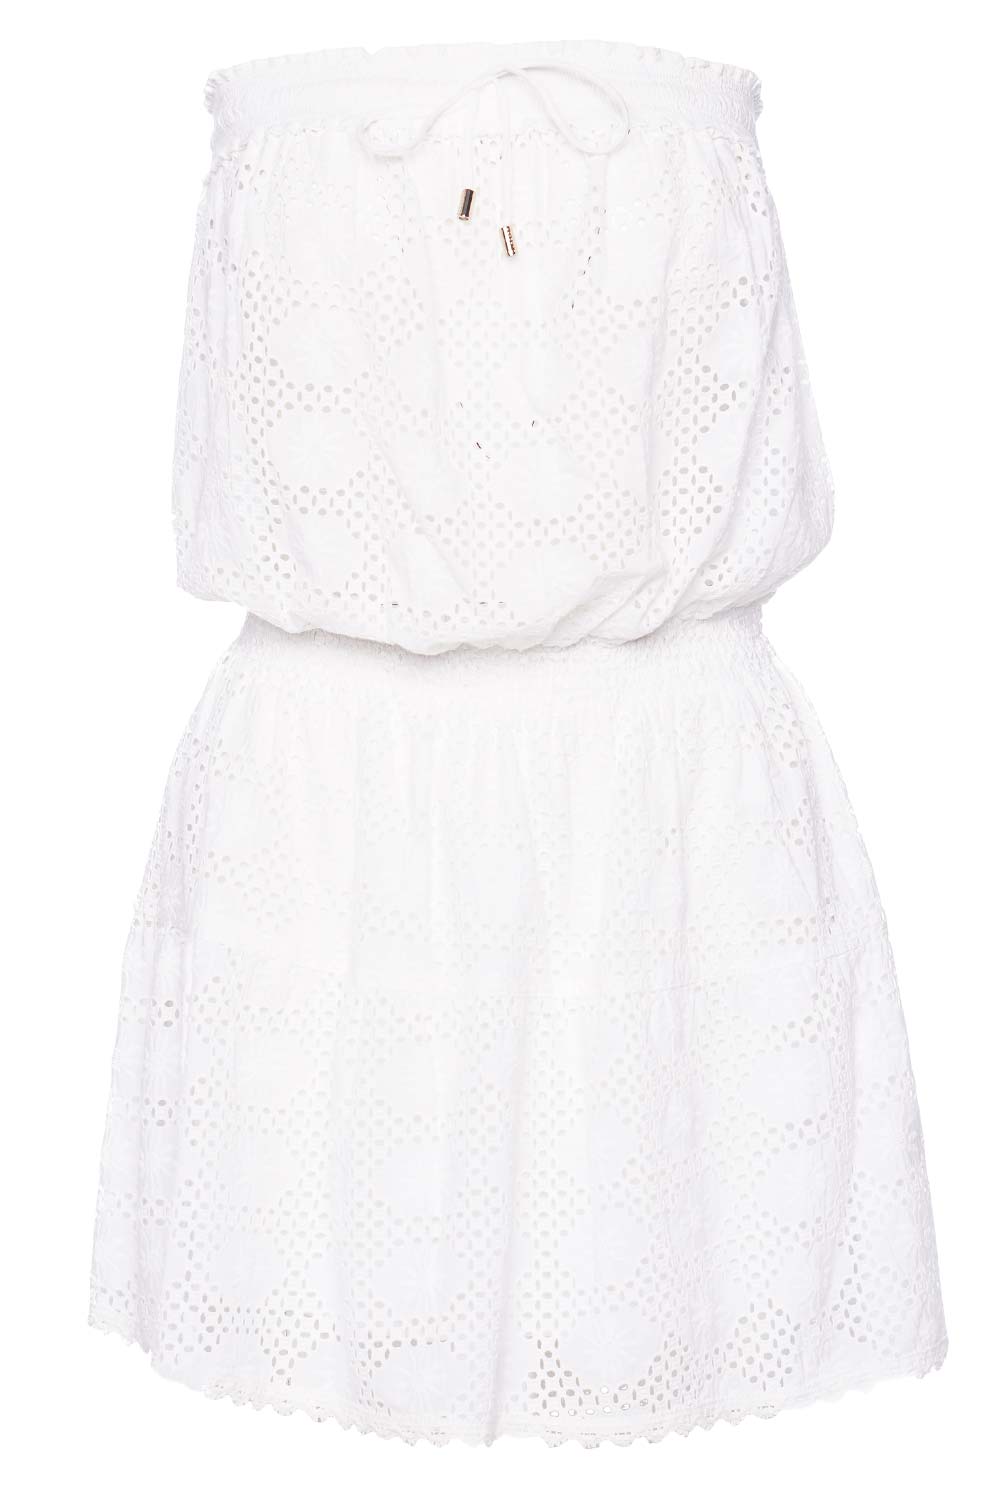 Melissa Odabash Colette Broderie Anglaise Strapless Cover Up